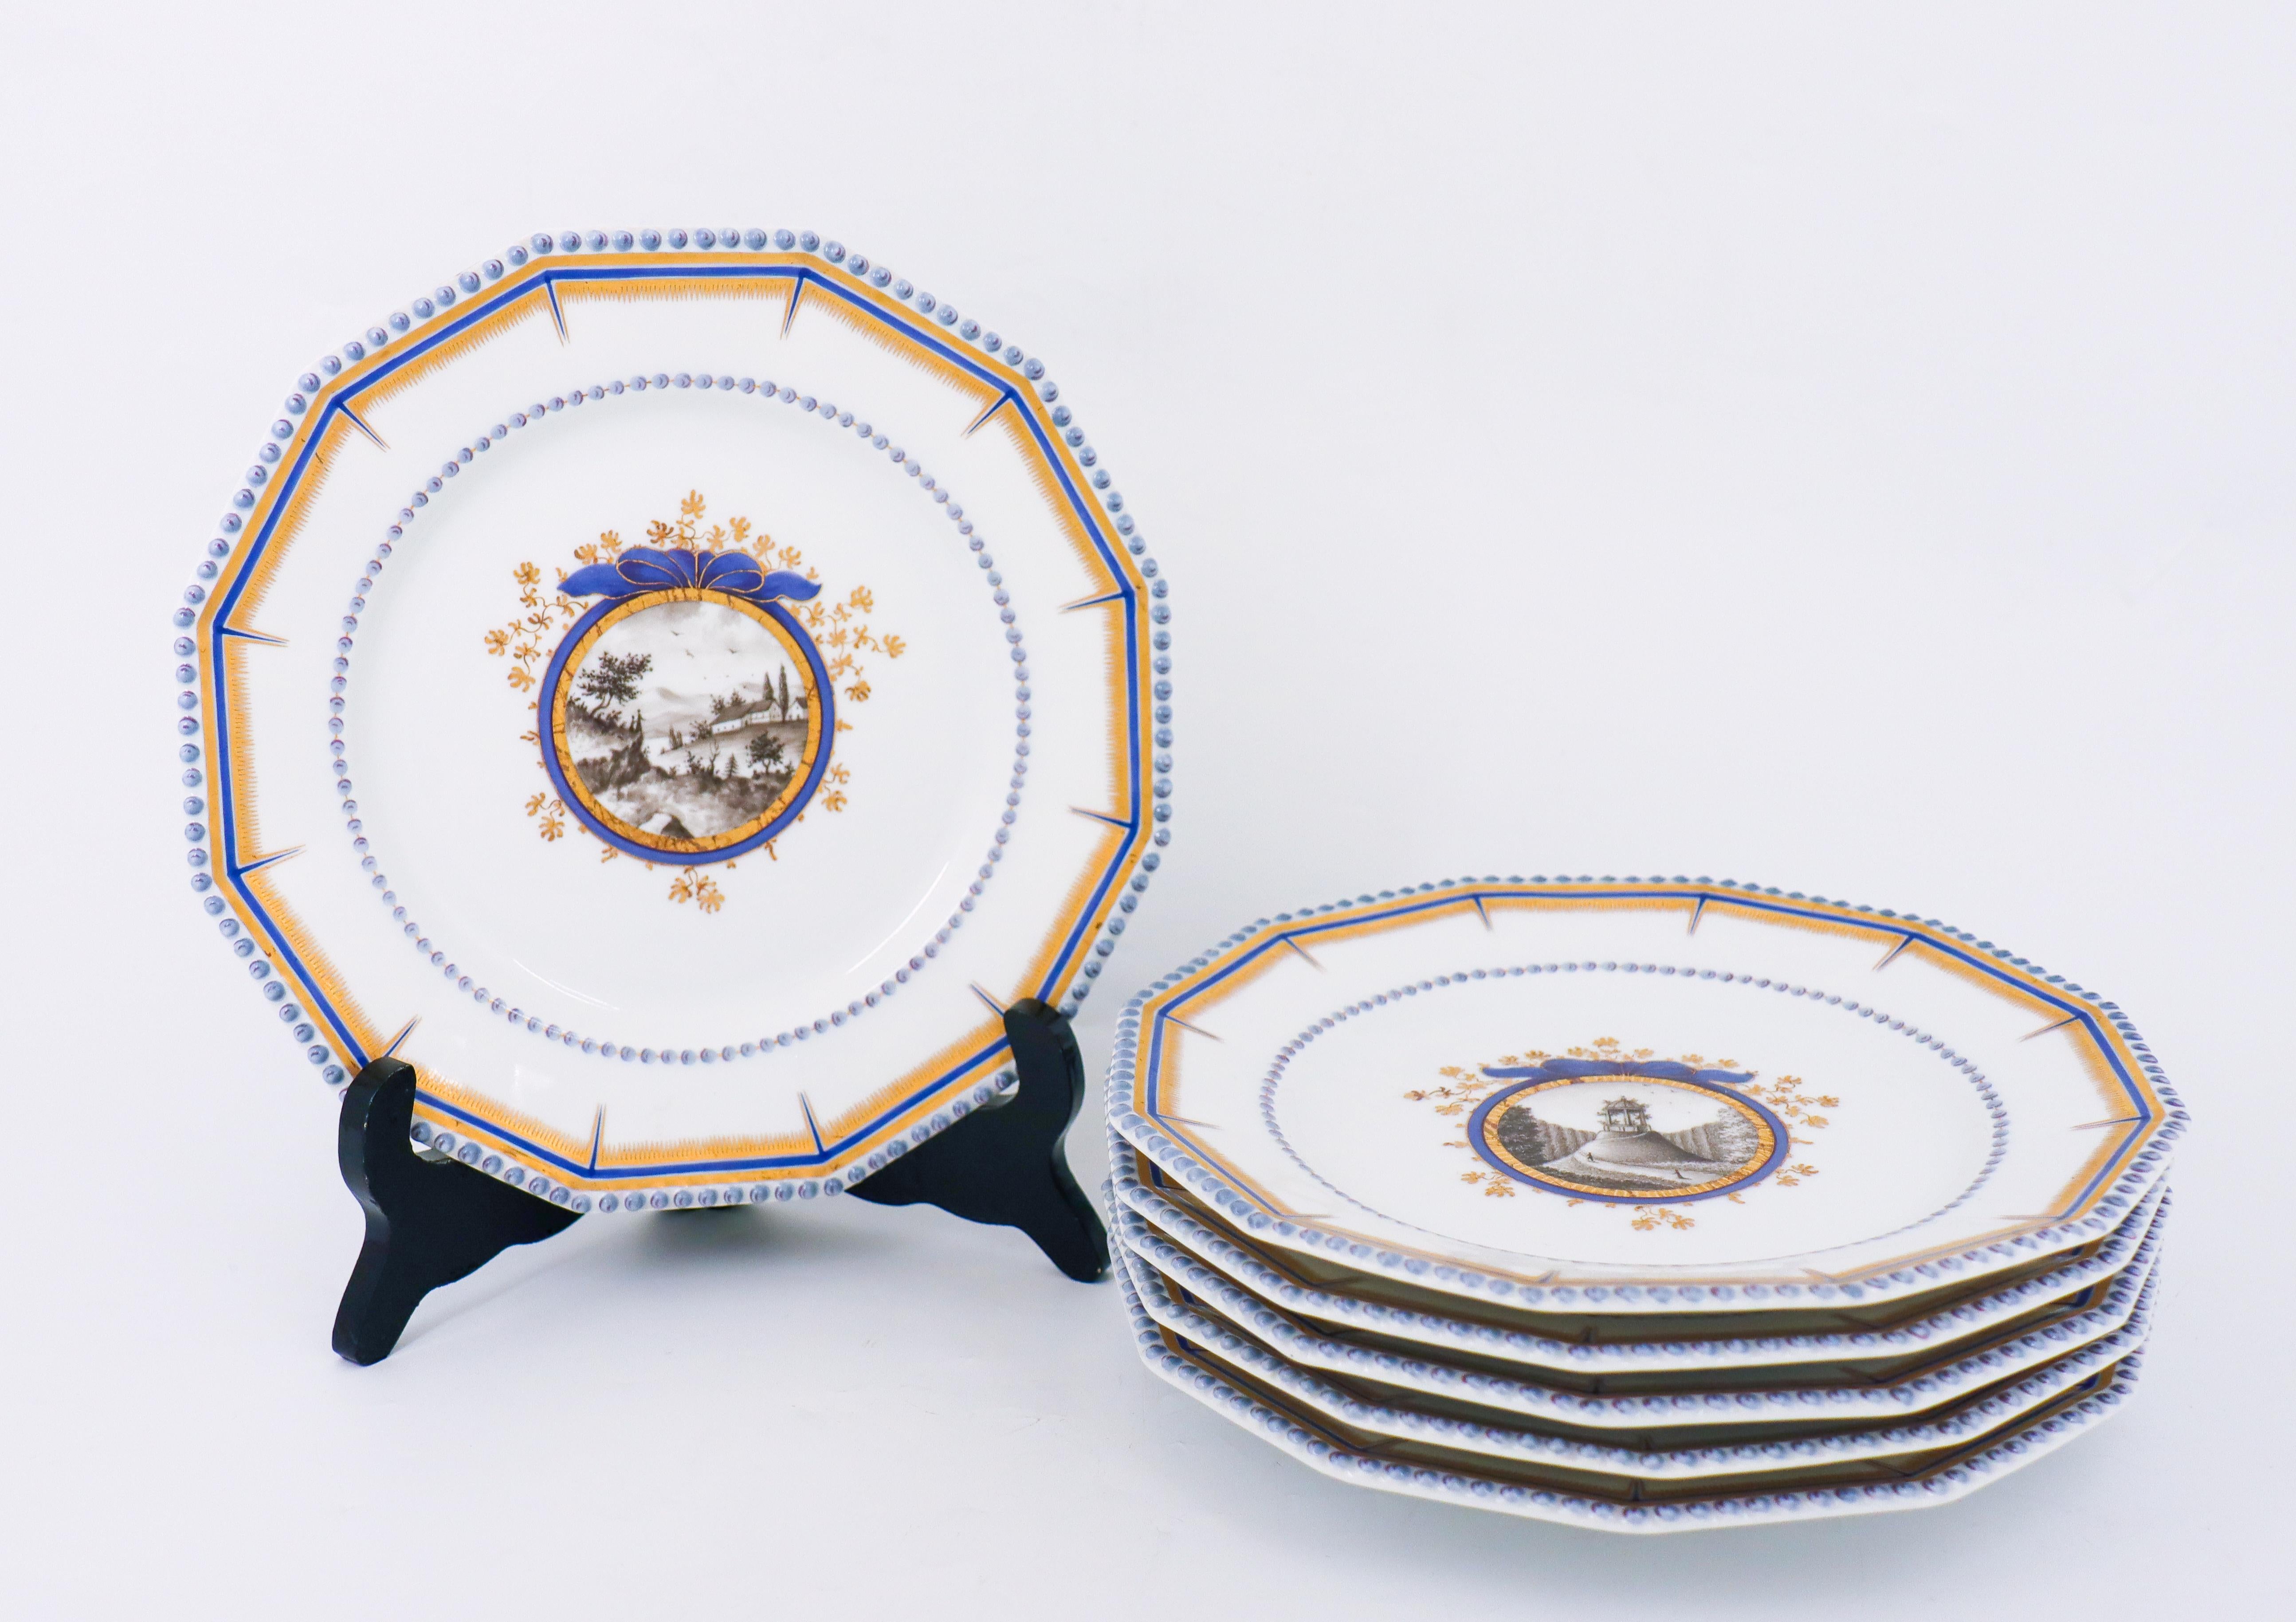 6 Dessert plates from the Perl